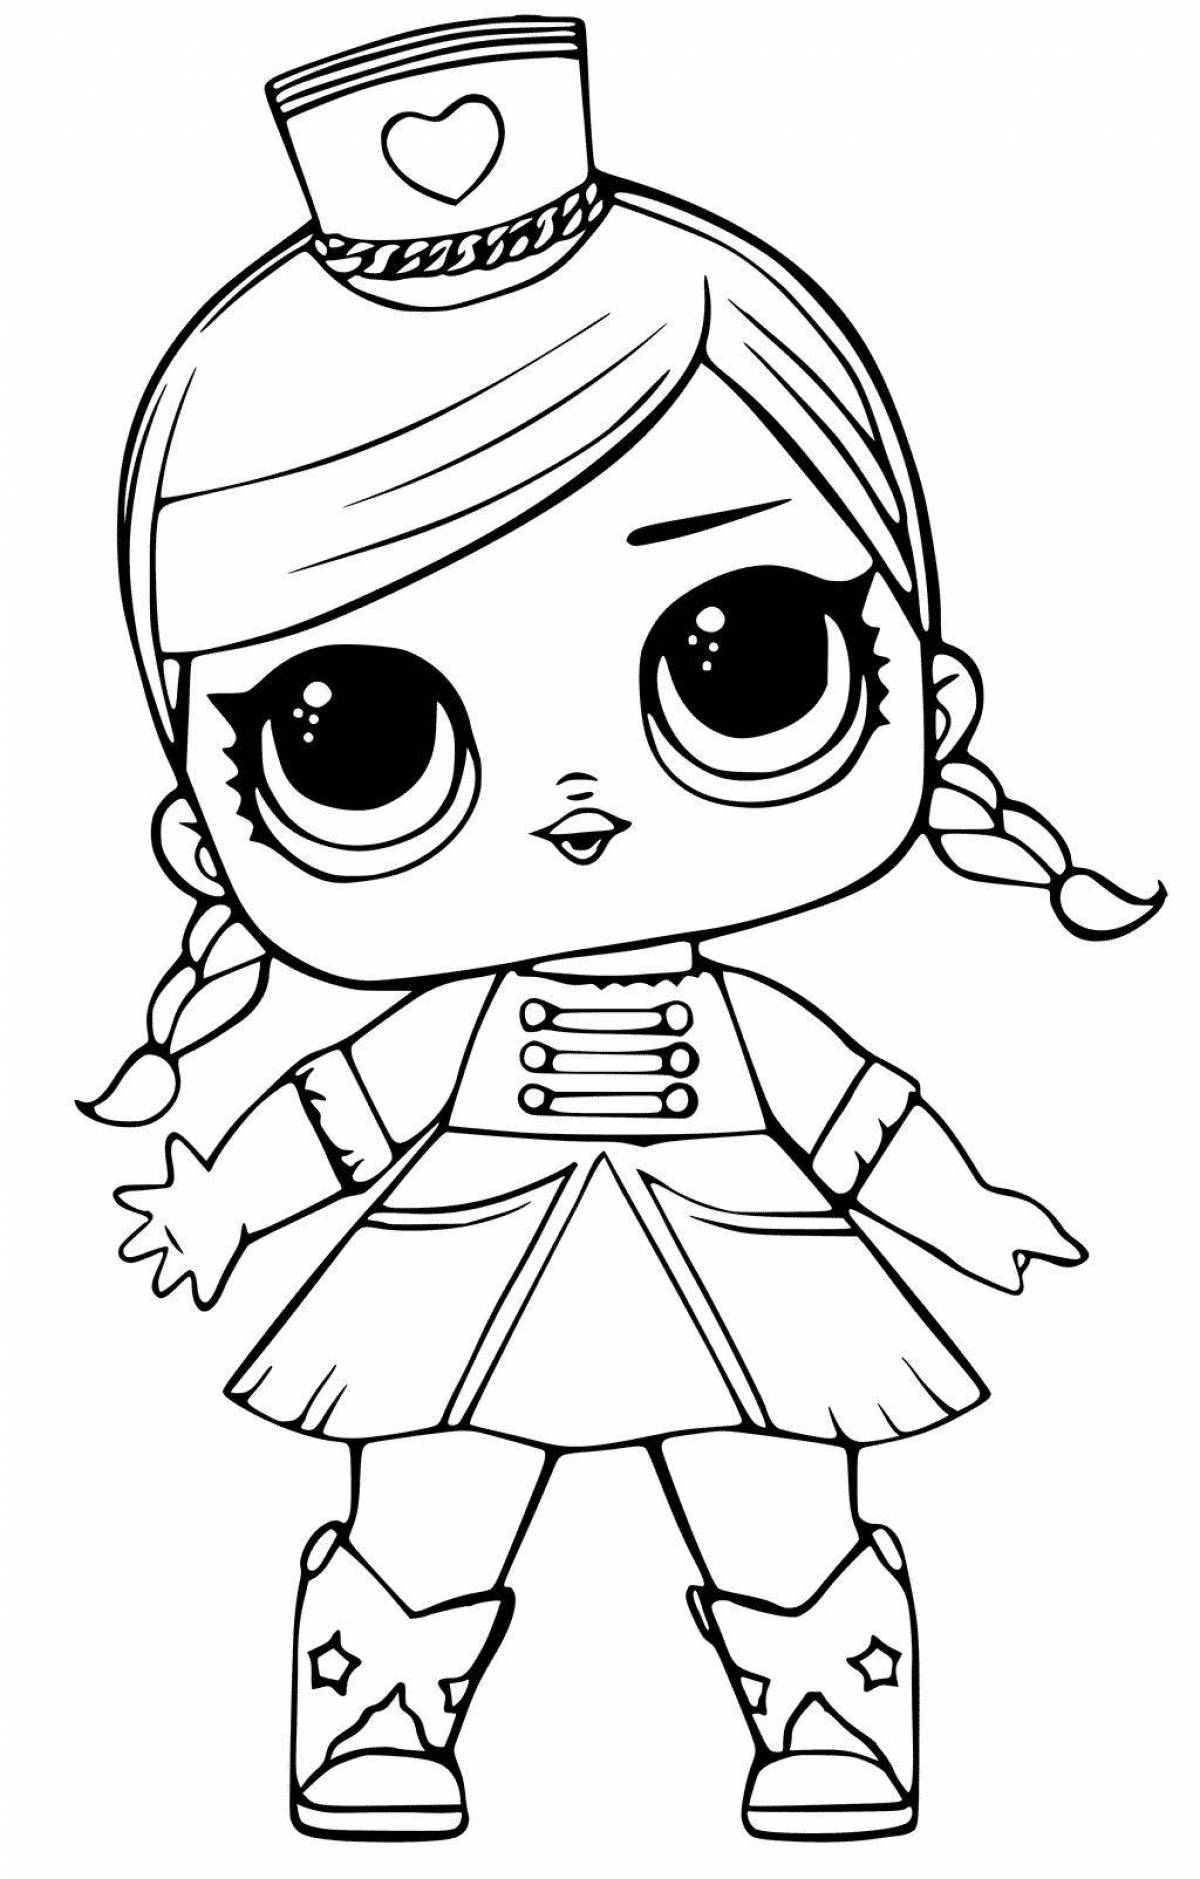 Fun Coloring Book for Lowe Dolls for Kids